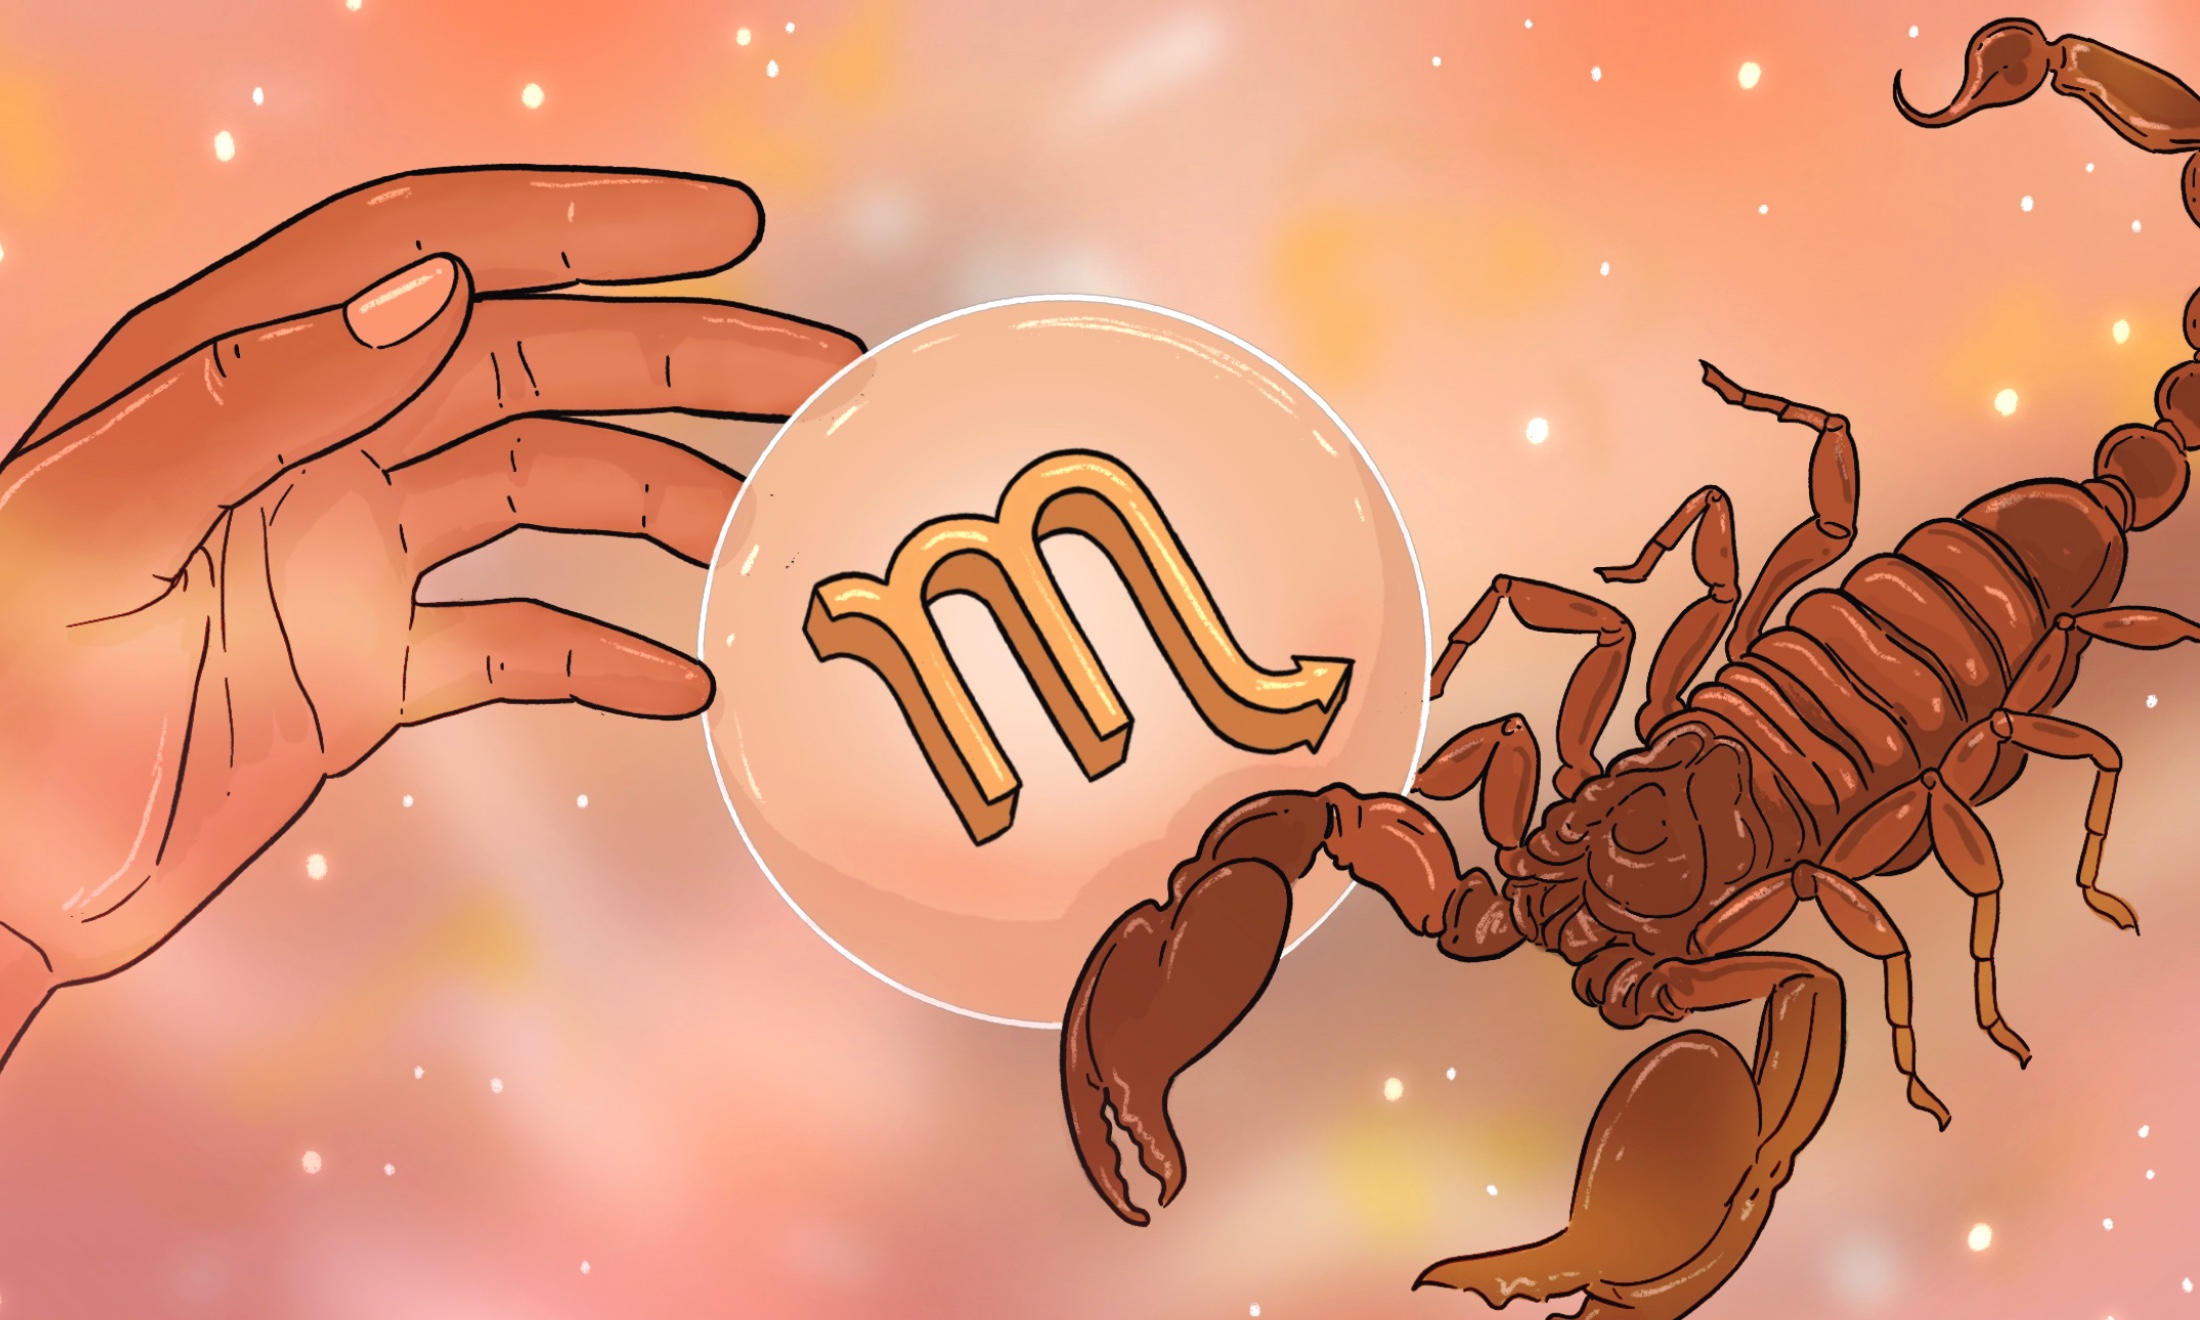 gal-dem horoscopes: There’s no hiding from the truth this Scorpio season